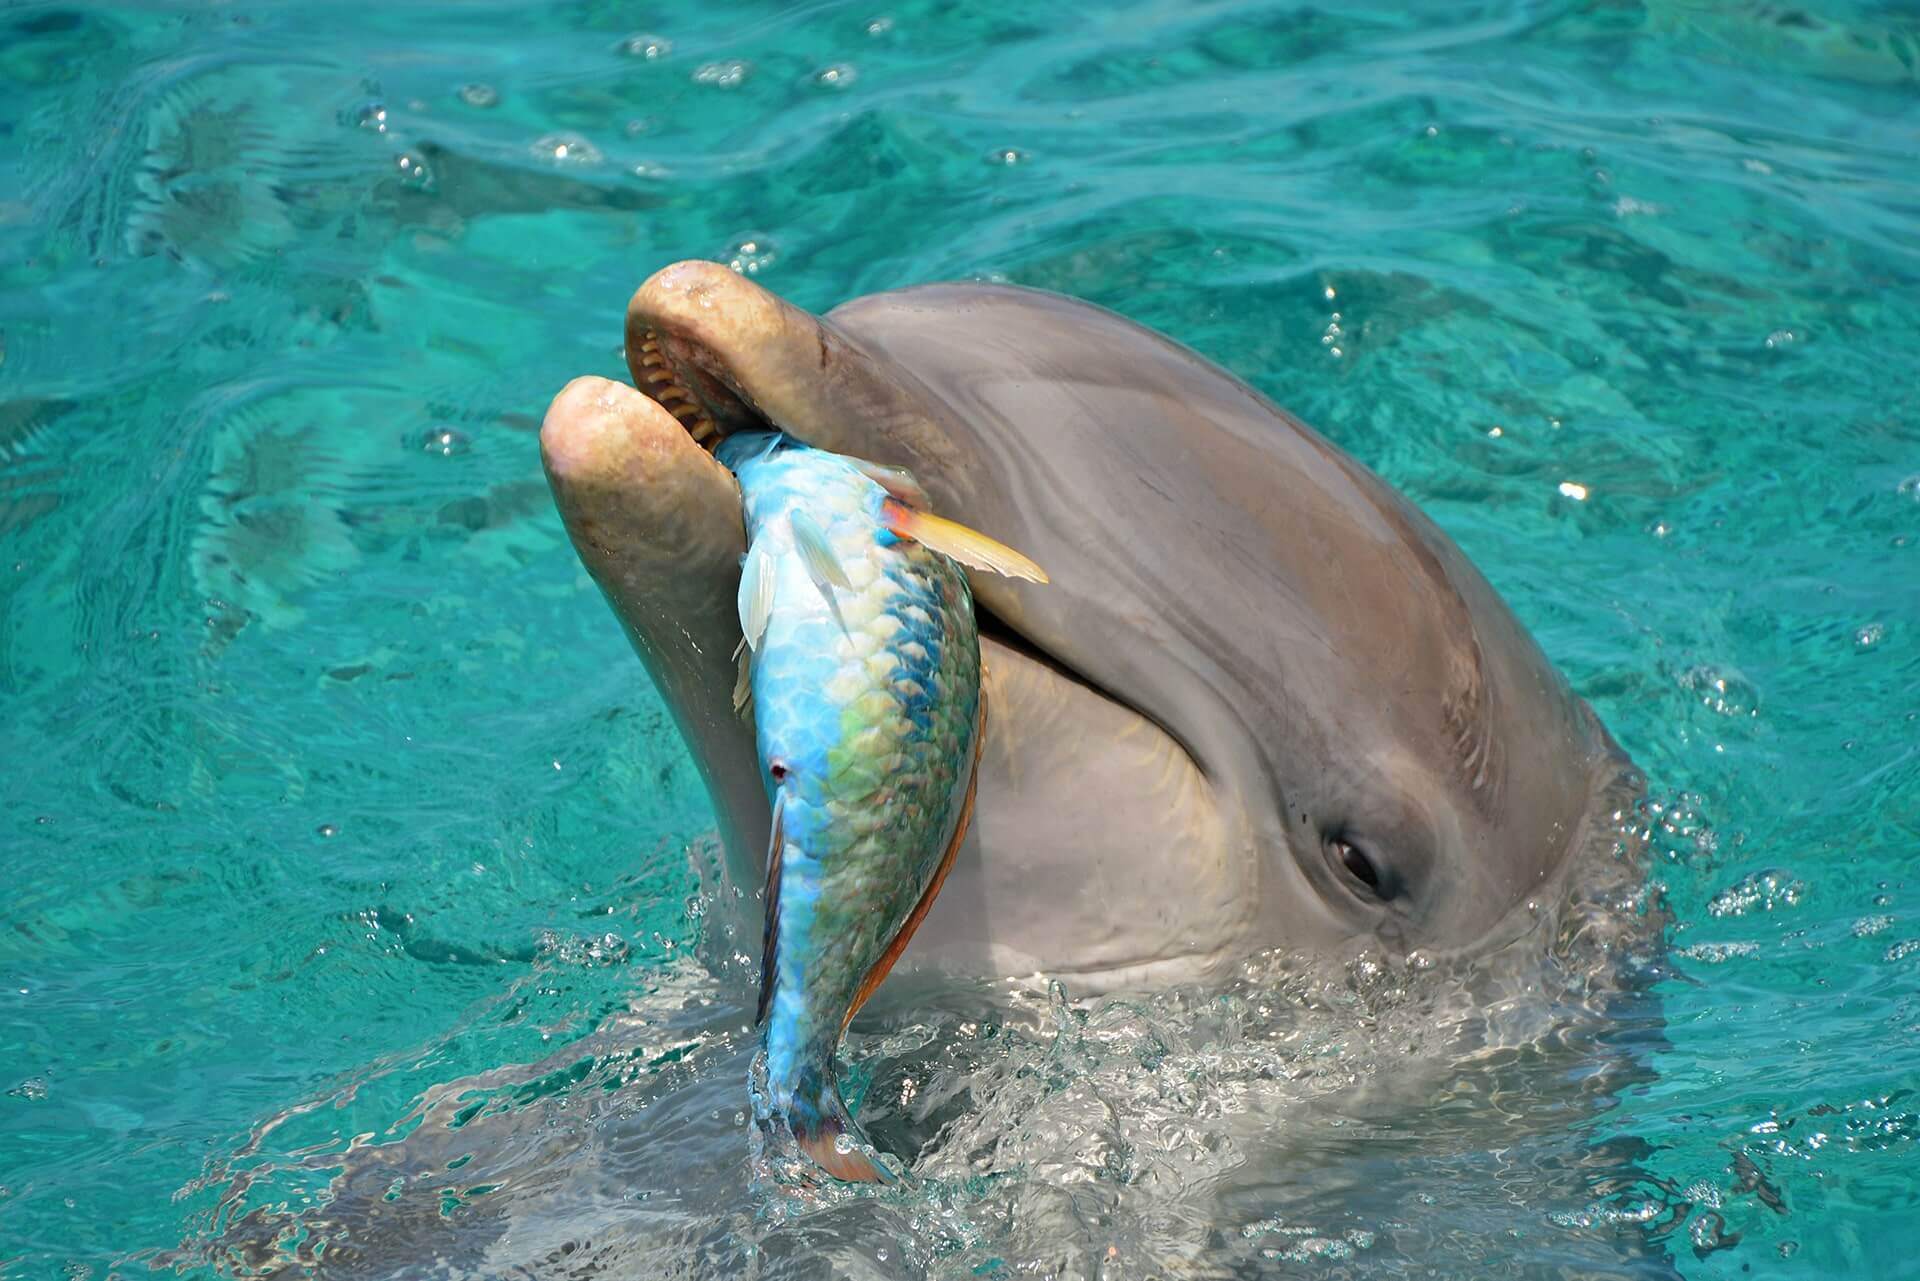 A dolphin eating a fish at the dolphin academy in Curaçao.